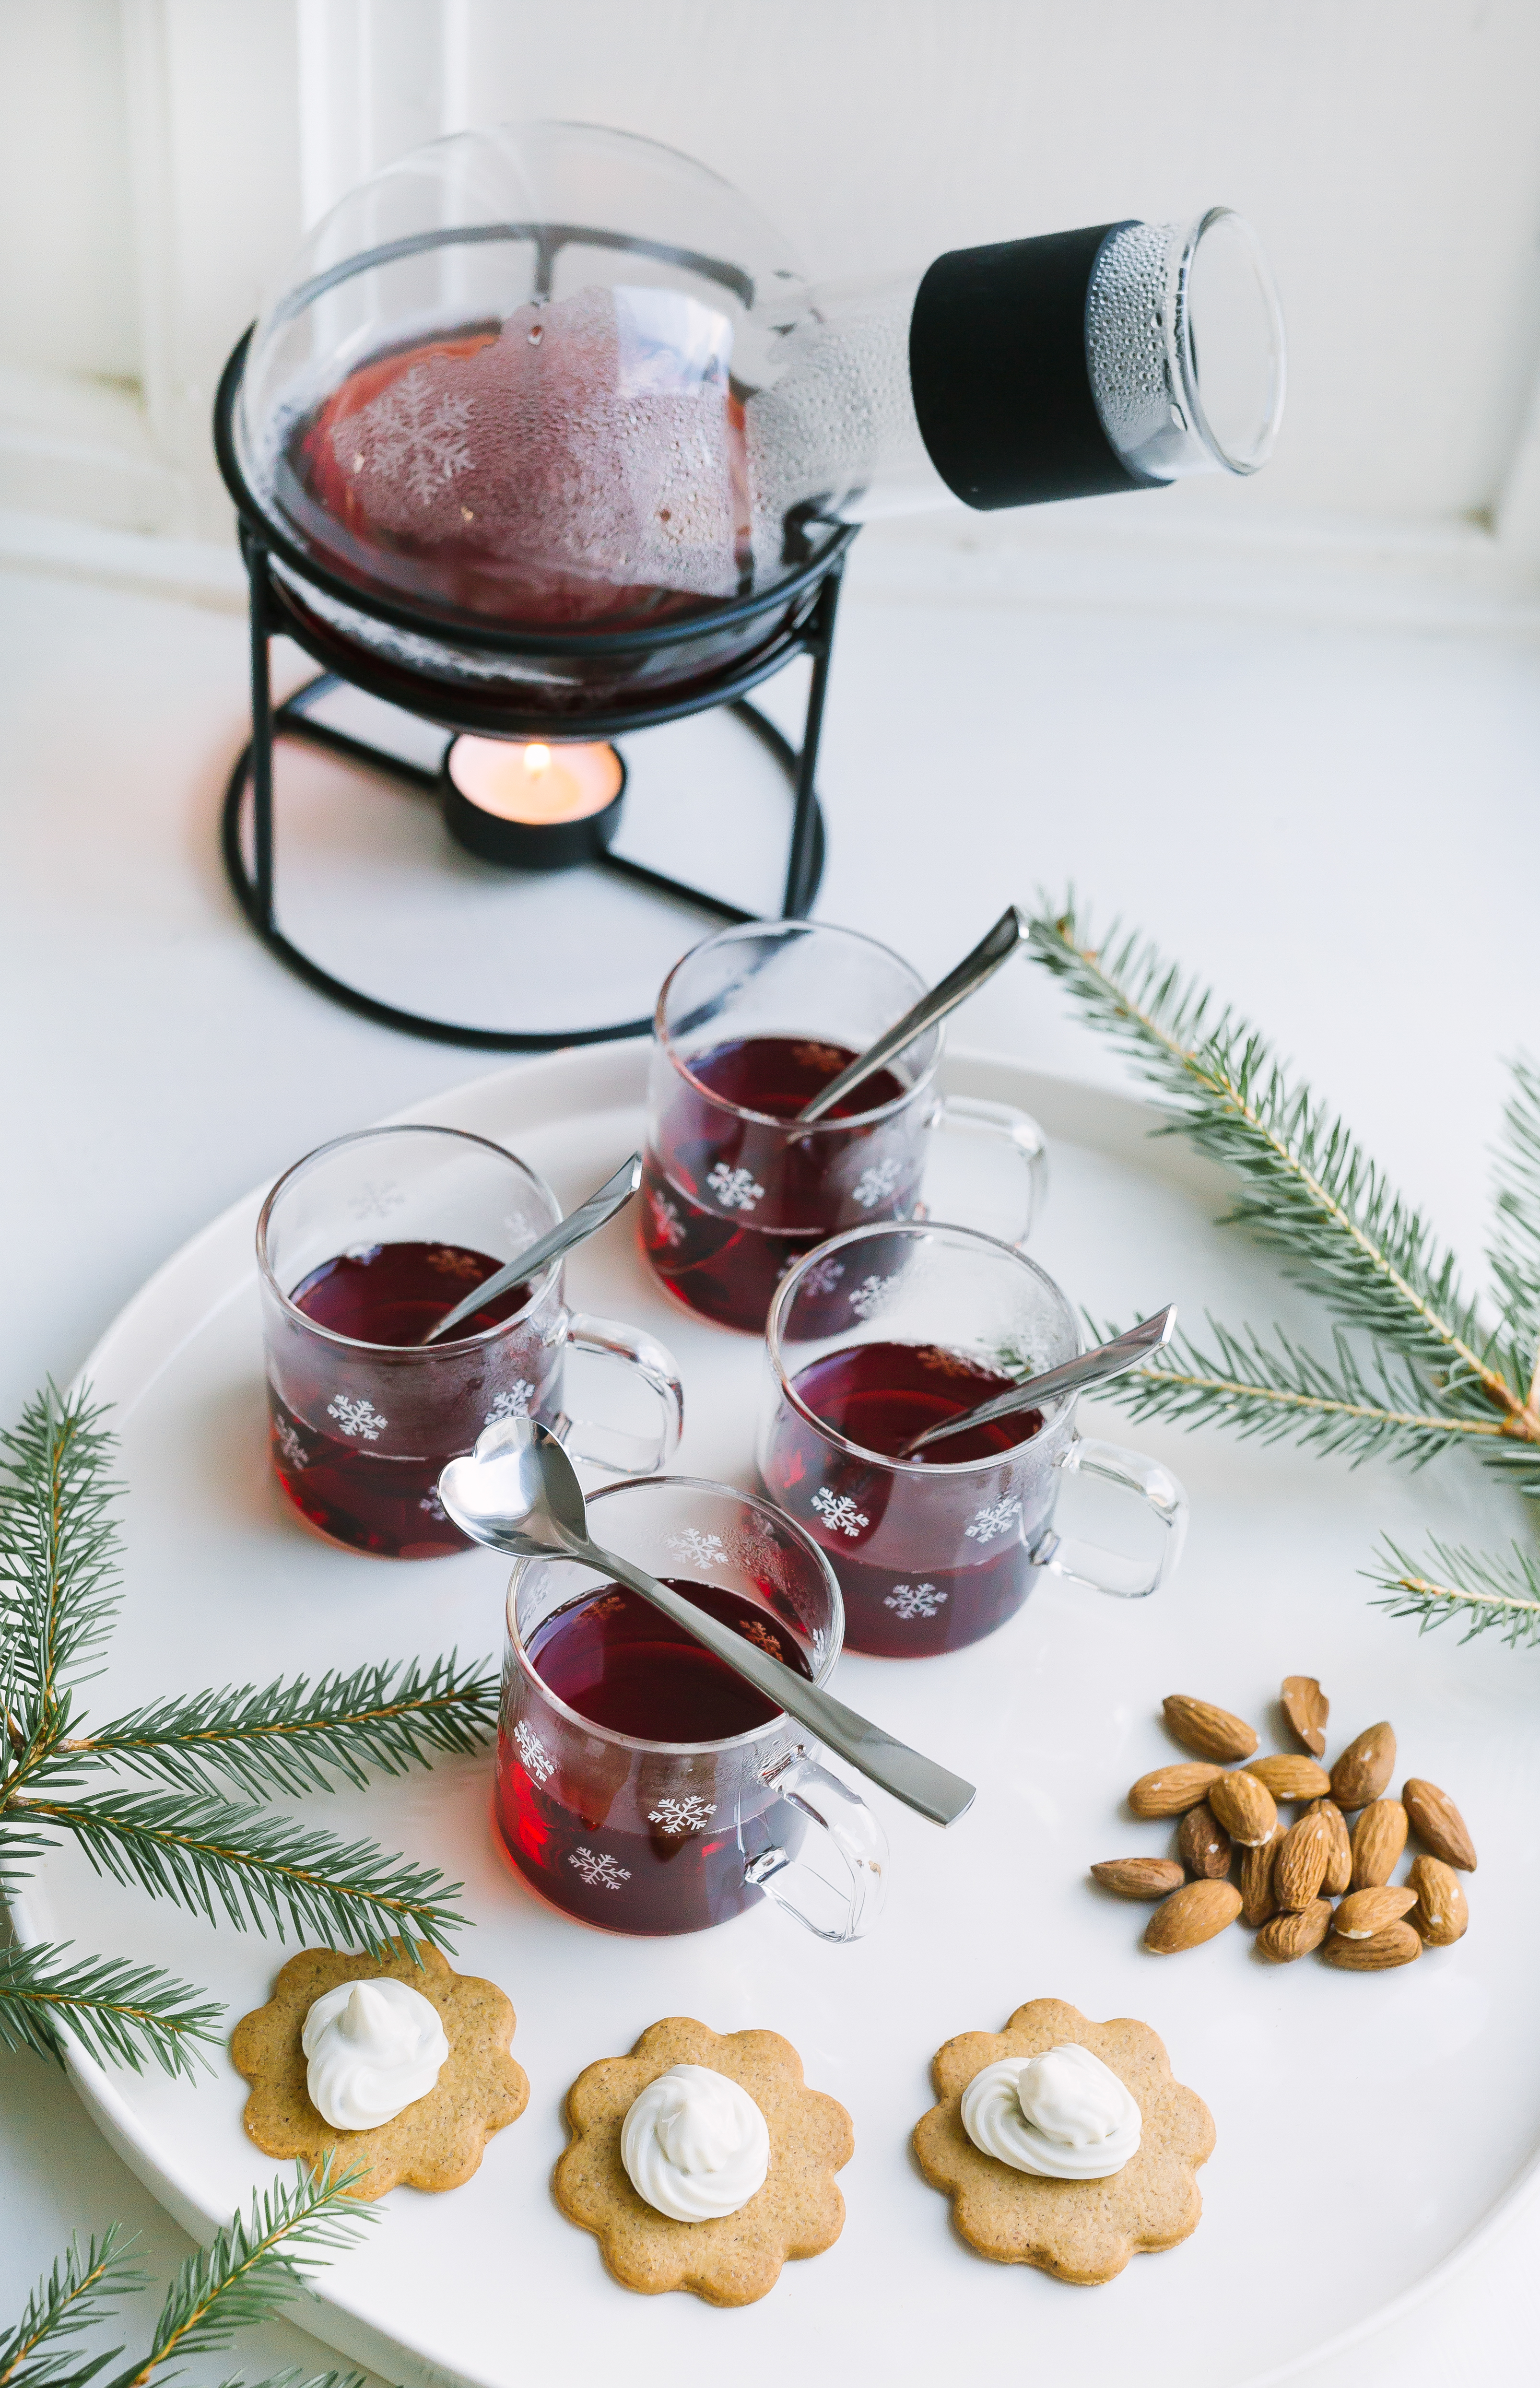 https://www.nordicnest.com/assets/blobs/dorre-snow-star-mulled-wine-warmer-13-l-glass-iron/506015-01_2_EnvironmentImage-a4144fc840.jpg